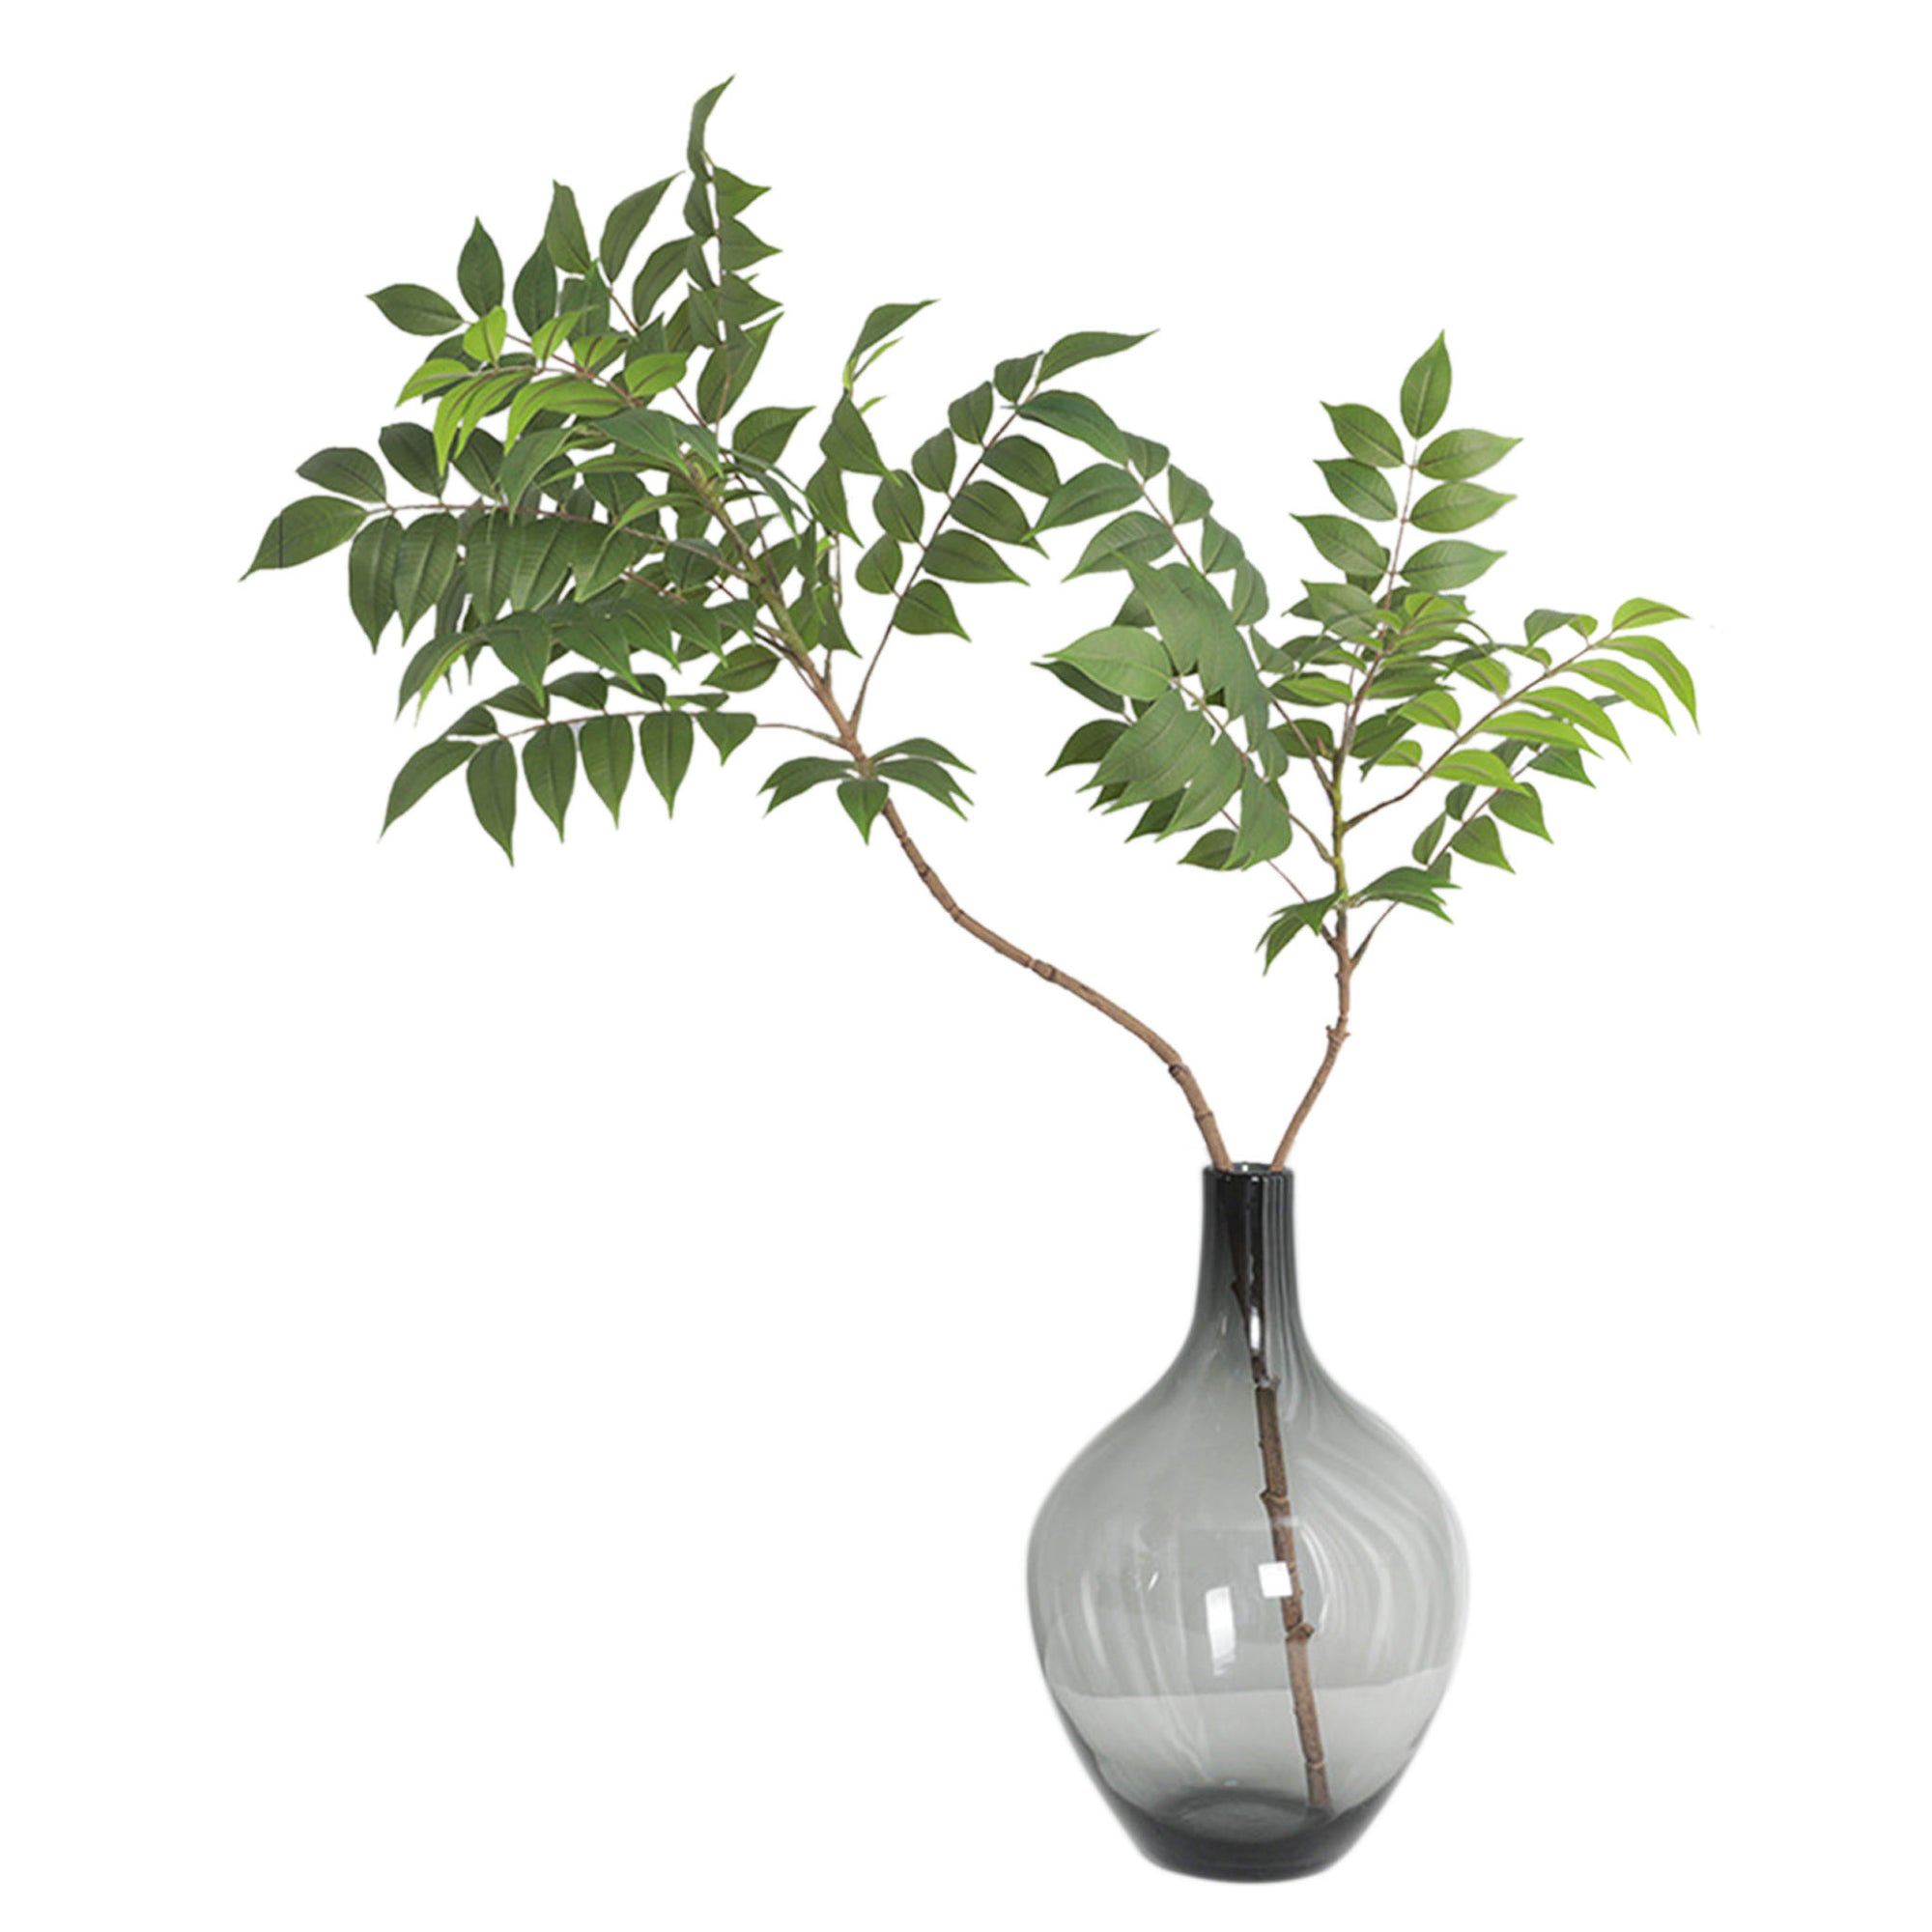 Artificial Wisteria Leaves Branches for Home Decor